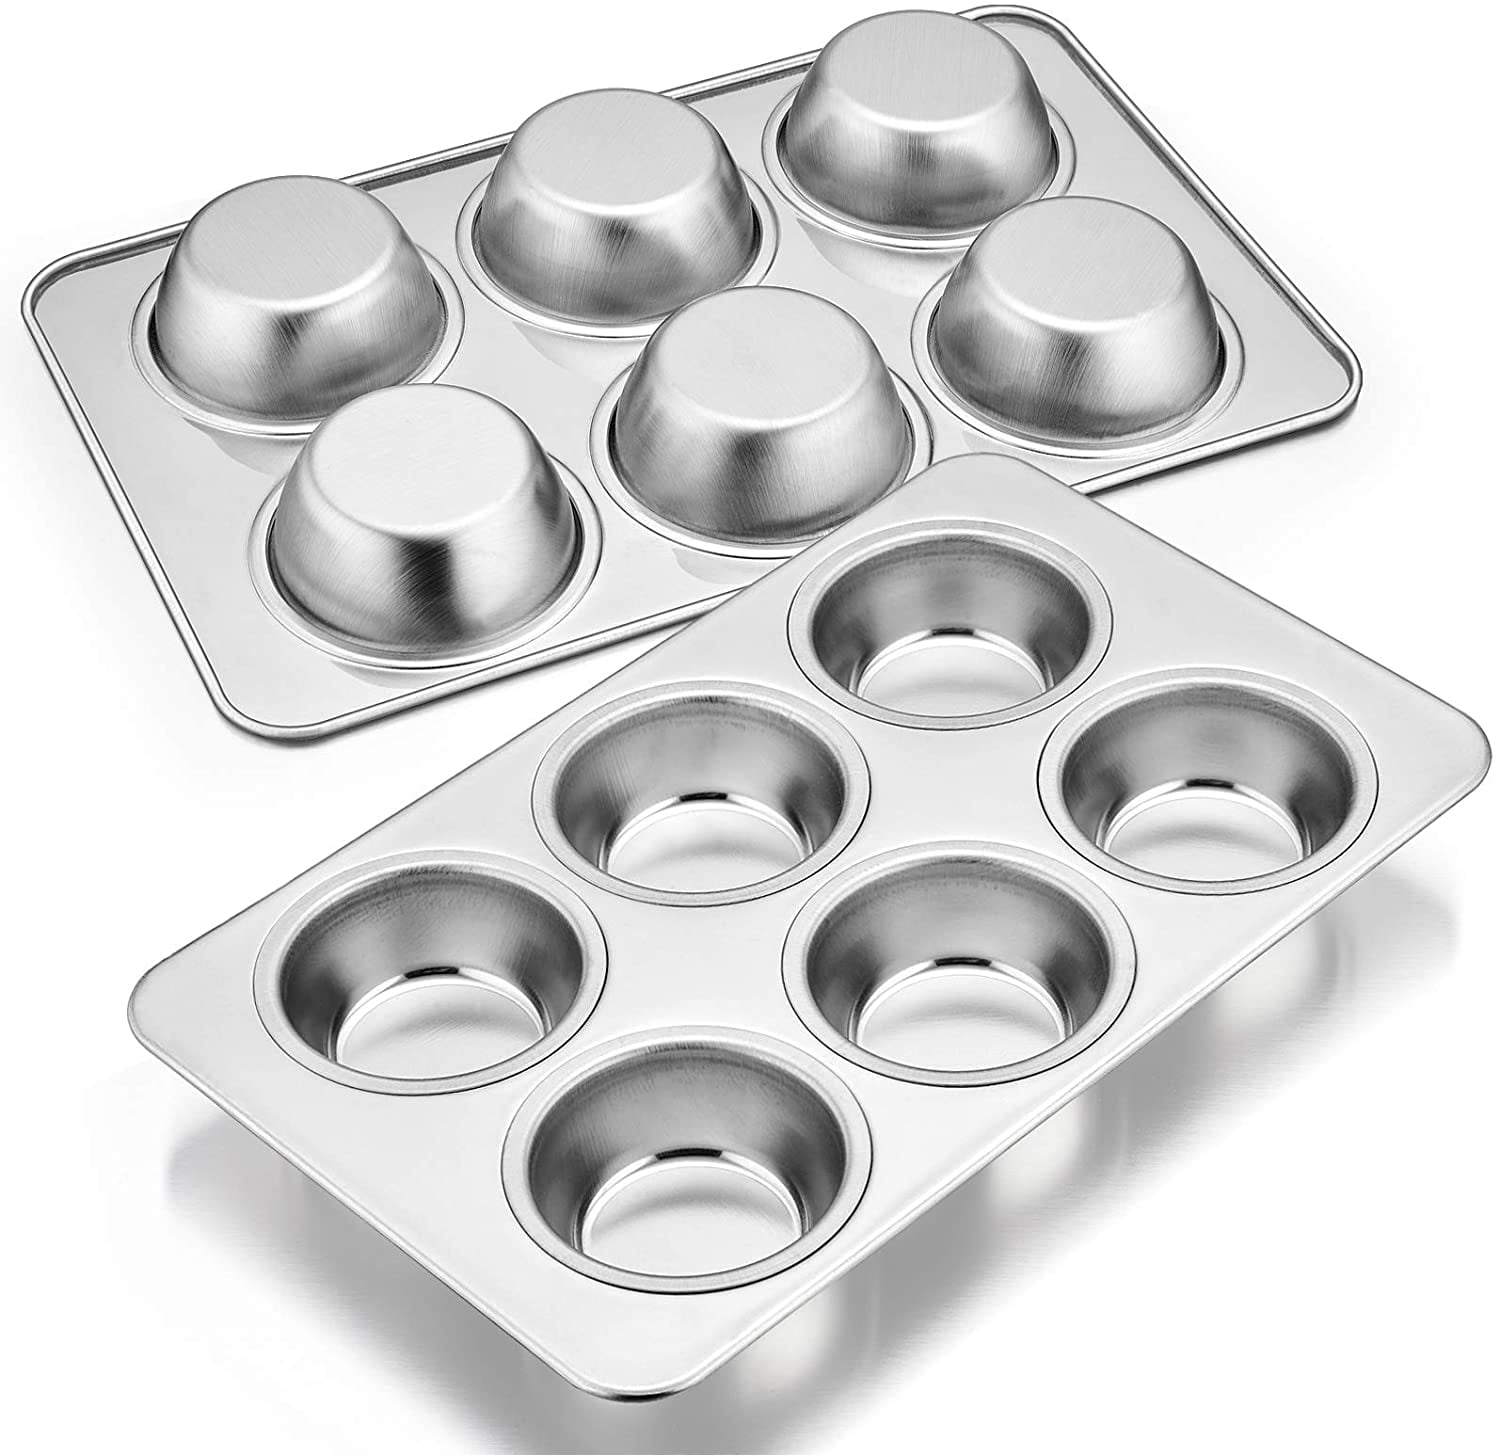 P&P CHEF Muffin Pan Cupcake Pans Set of 2, Stainless Steel Muffin Pans  (6-Cups)